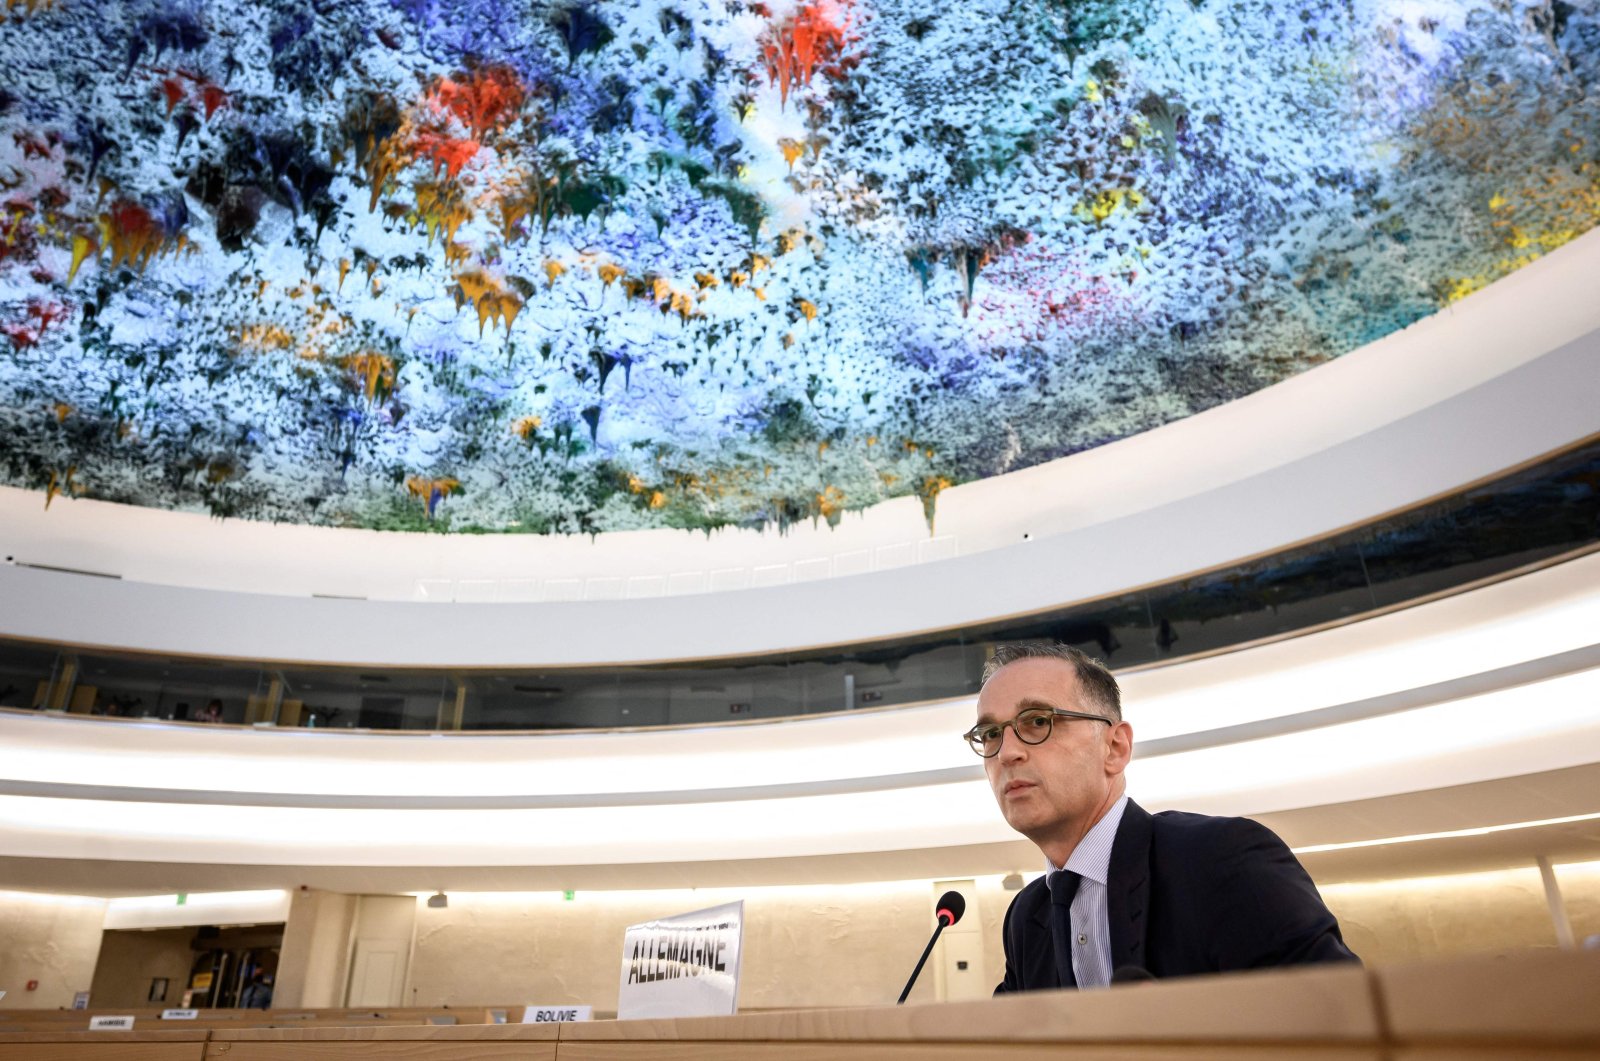 Germany's Foreign Minister Heiko Maas delivers a speech during a session of the U.N. Human Rights Council in Geneva, Switzerland, Sept. 13, 2021. (AFP Photo)